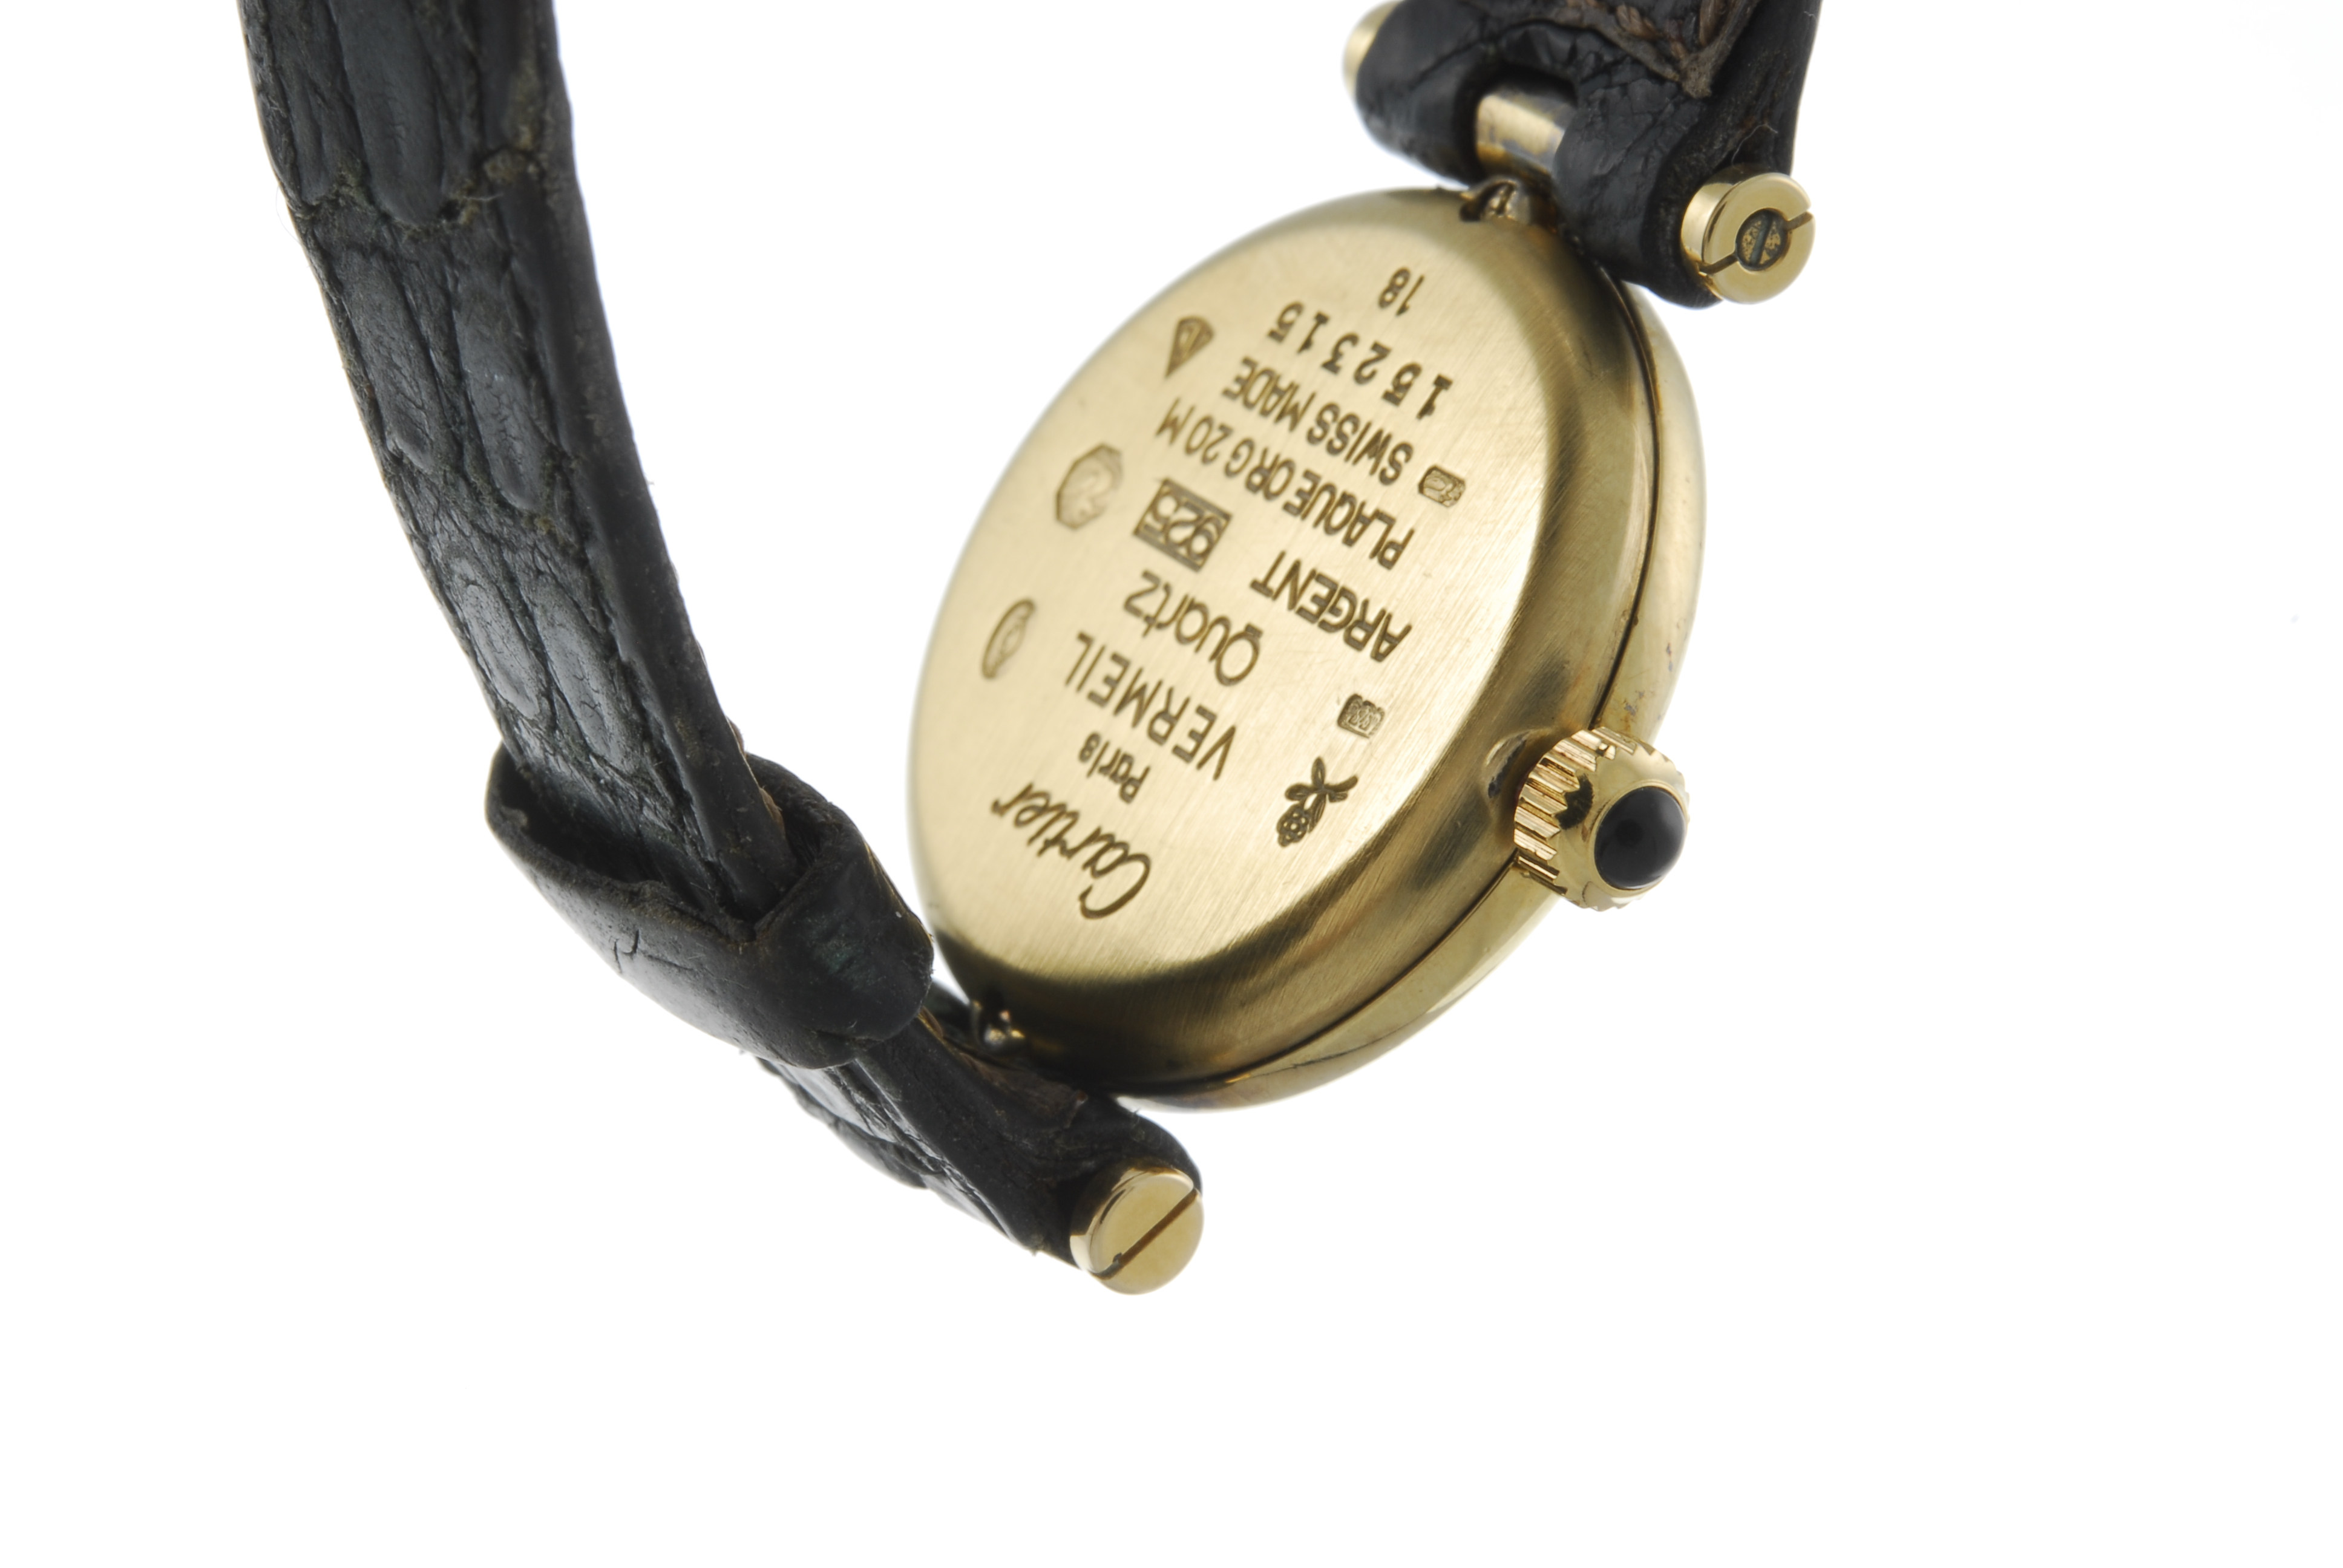 CARTIER - a Must De Cartier wrist watch. Gold plated silver case. Numbered 152315 18. Signed - Image 3 of 4